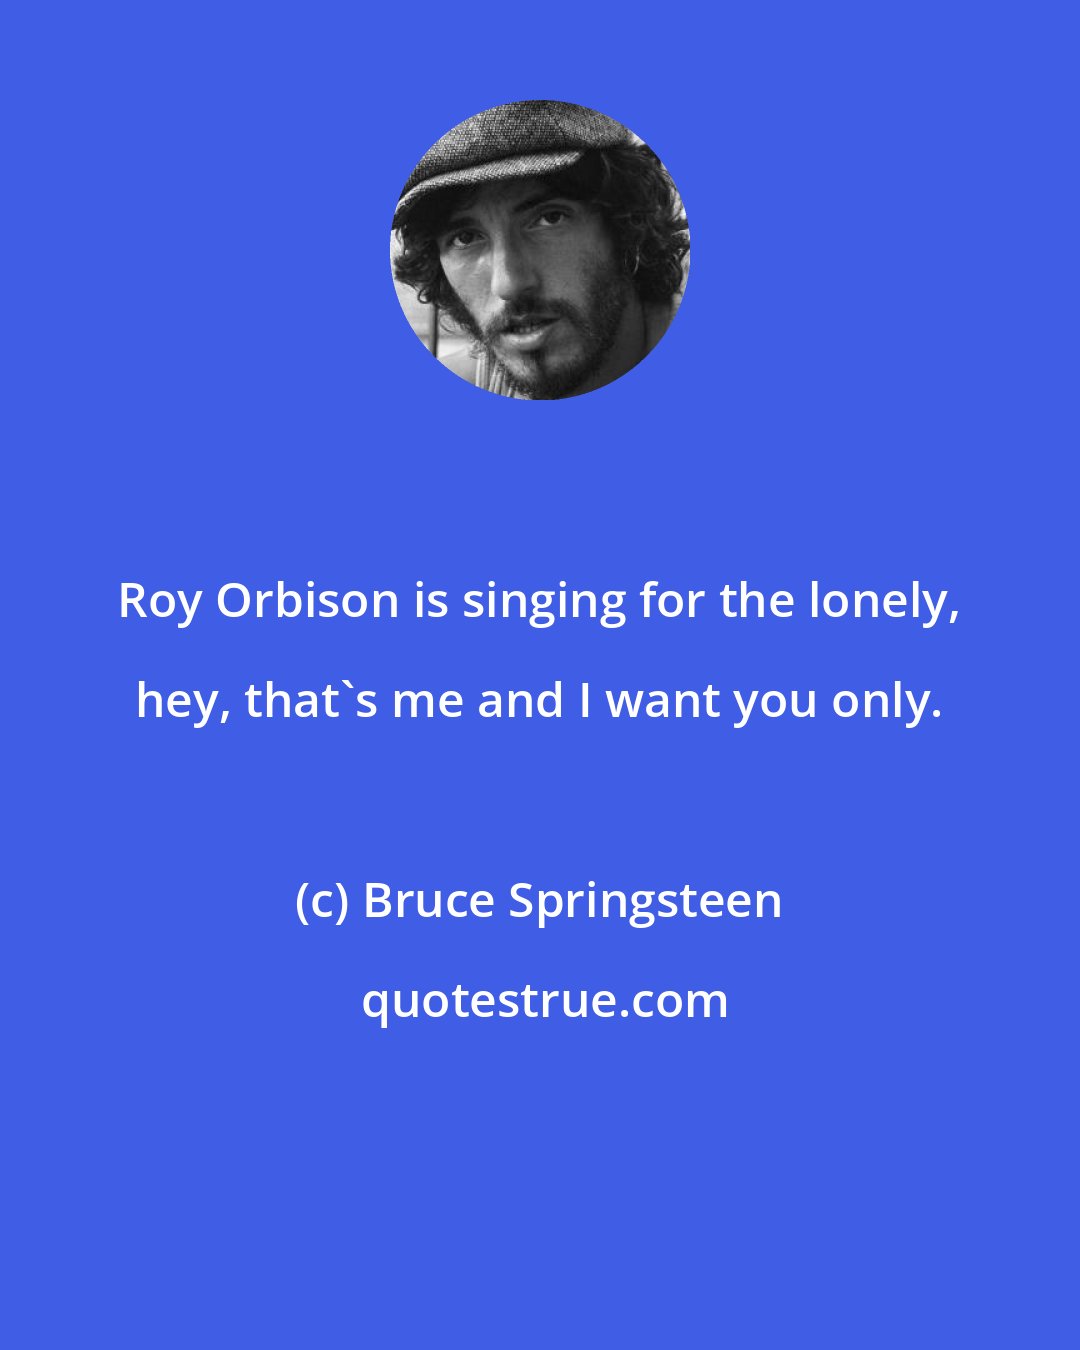 Bruce Springsteen: Roy Orbison is singing for the lonely, hey, that's me and I want you only.